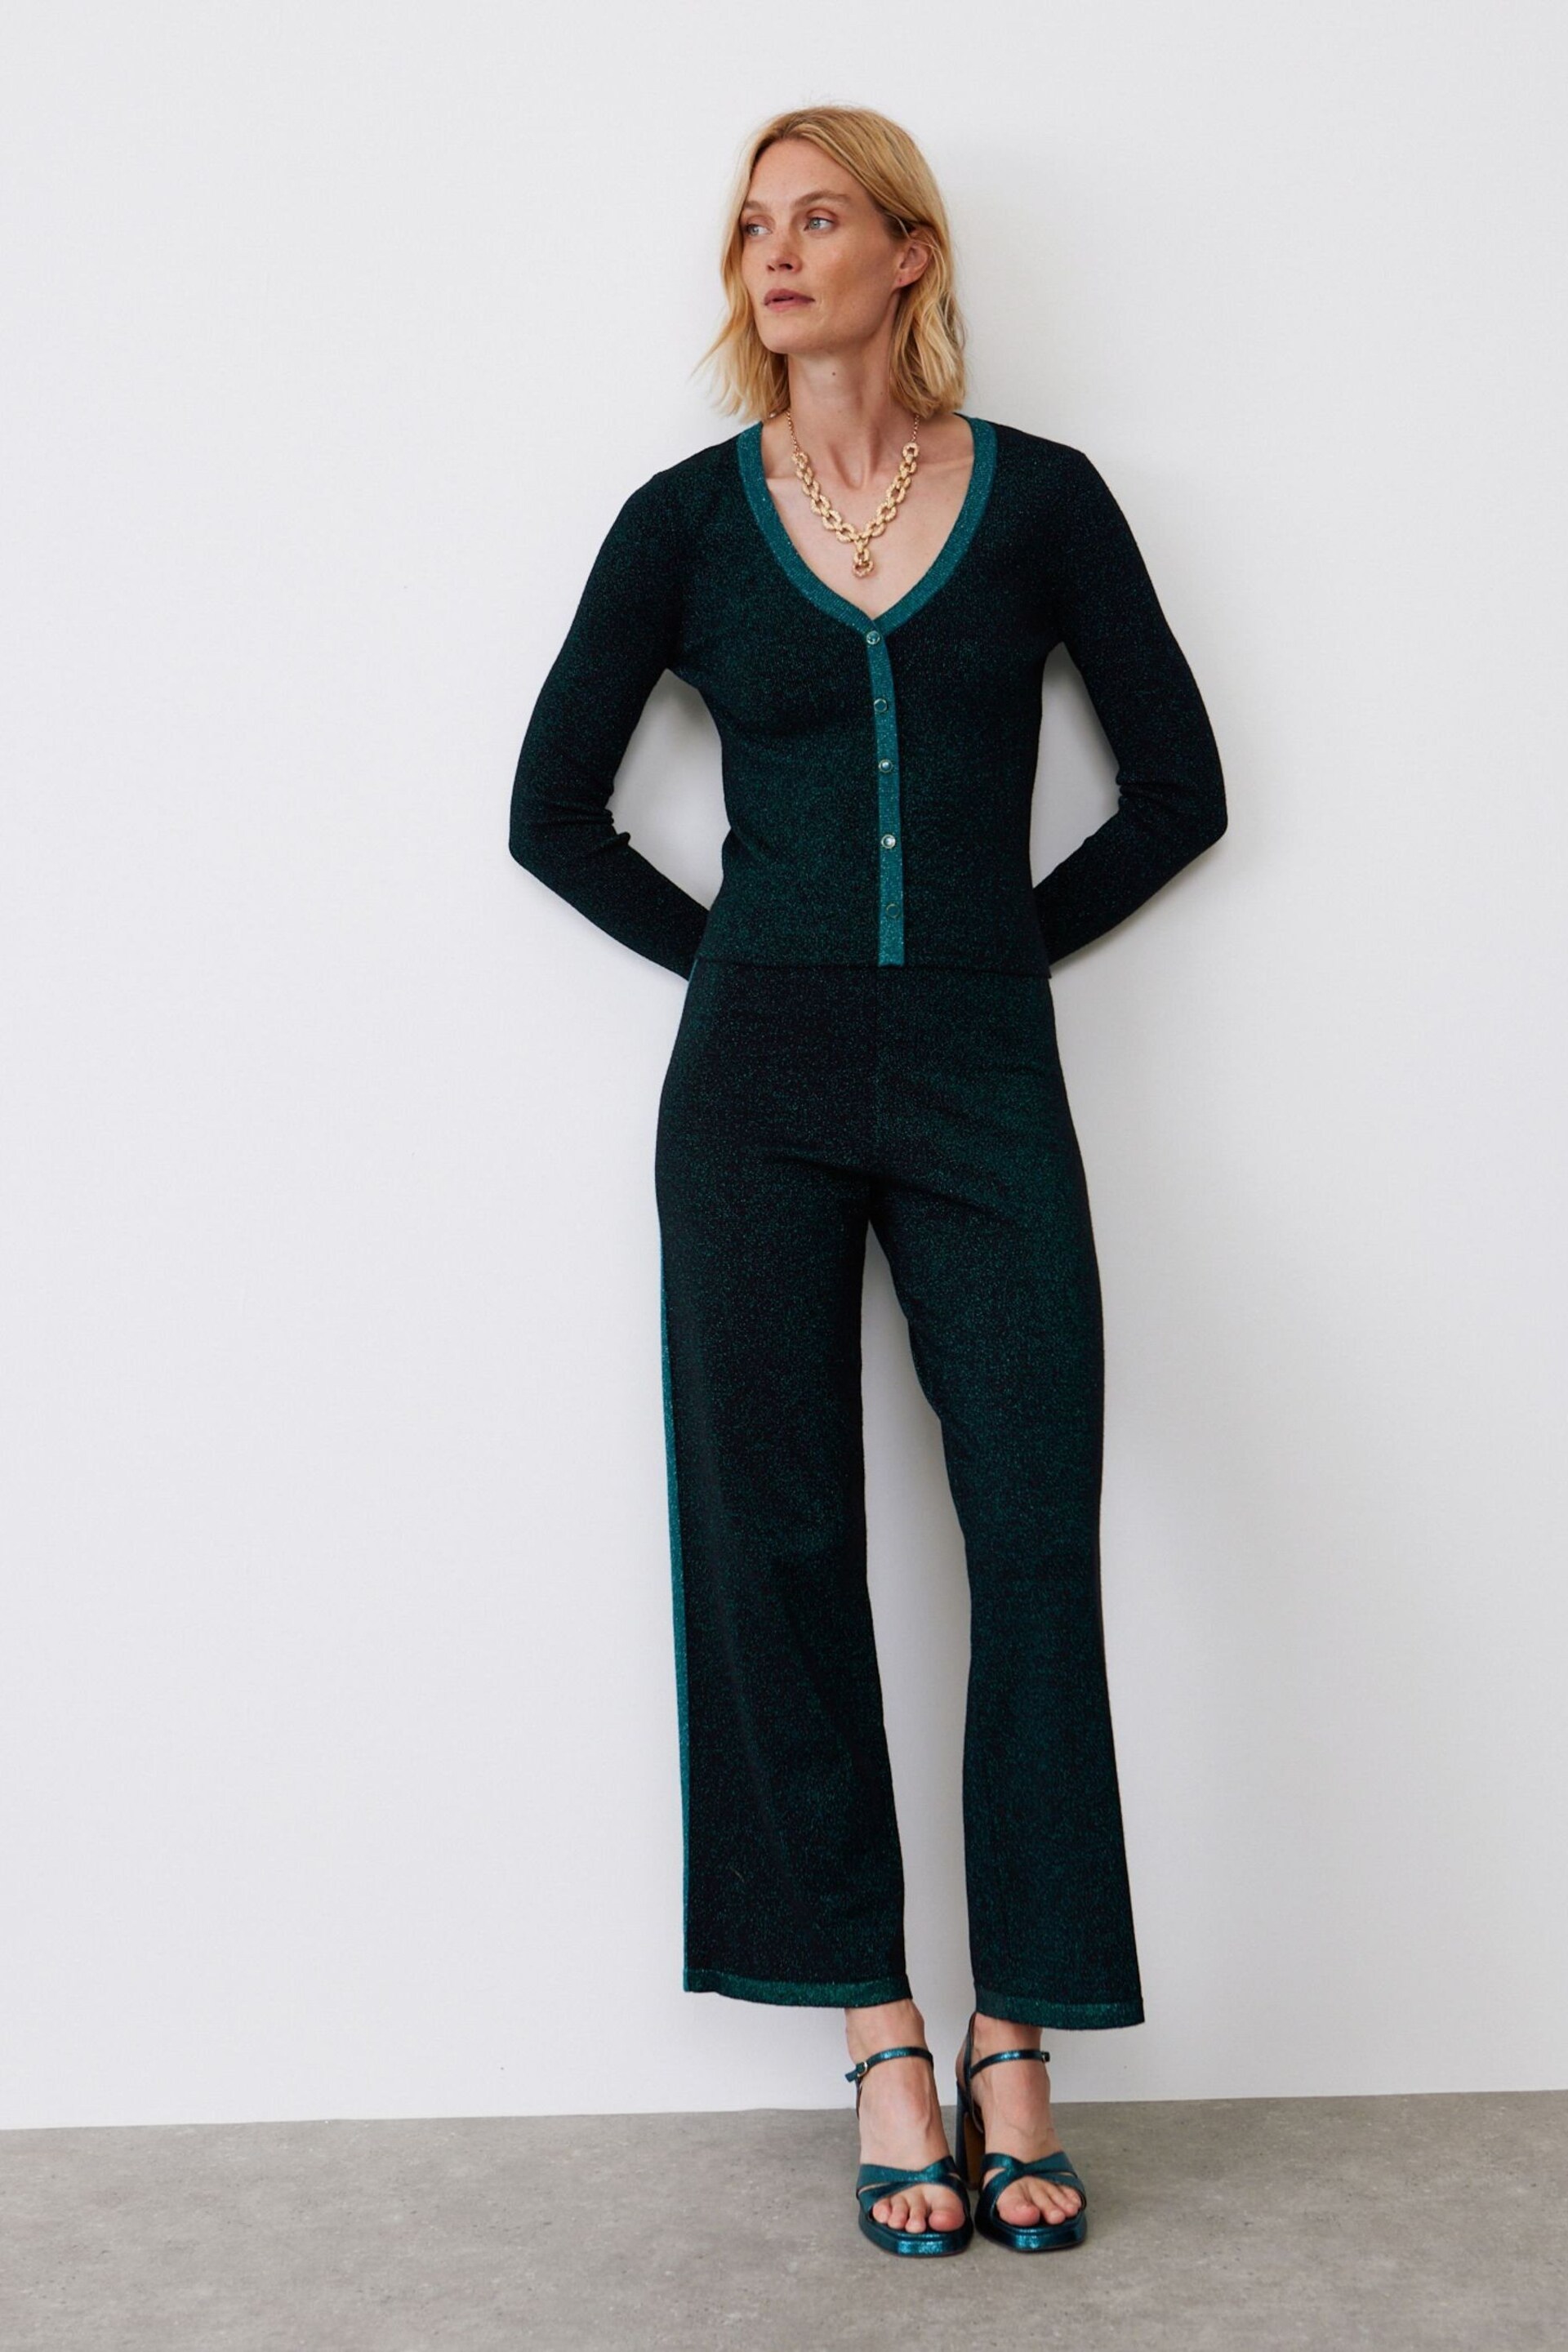 Oliver Bonas Green Sparkle Mirrorball Knitted Cardigan - Image 1 of 8